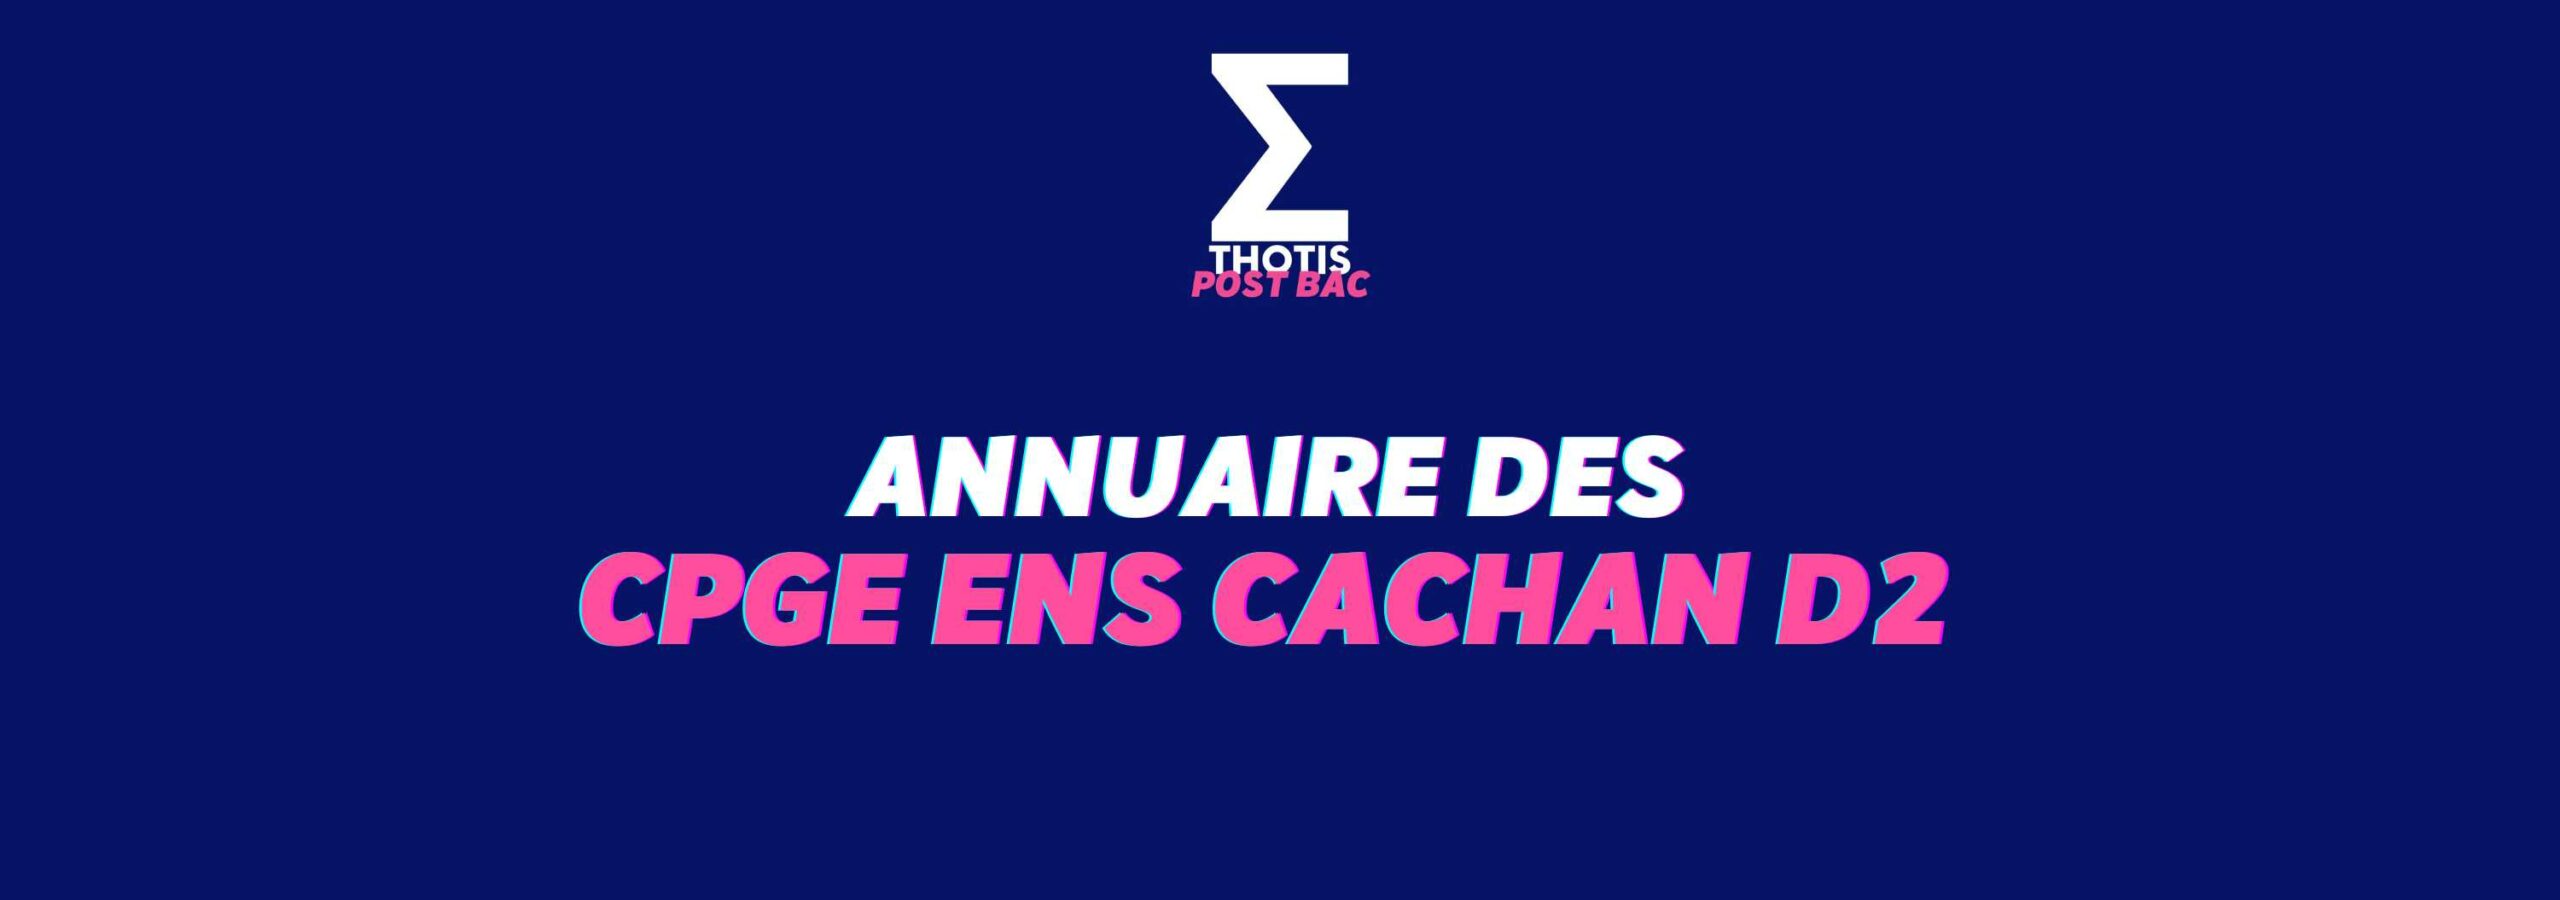 Annuaire CPGE ENS Cachan D2